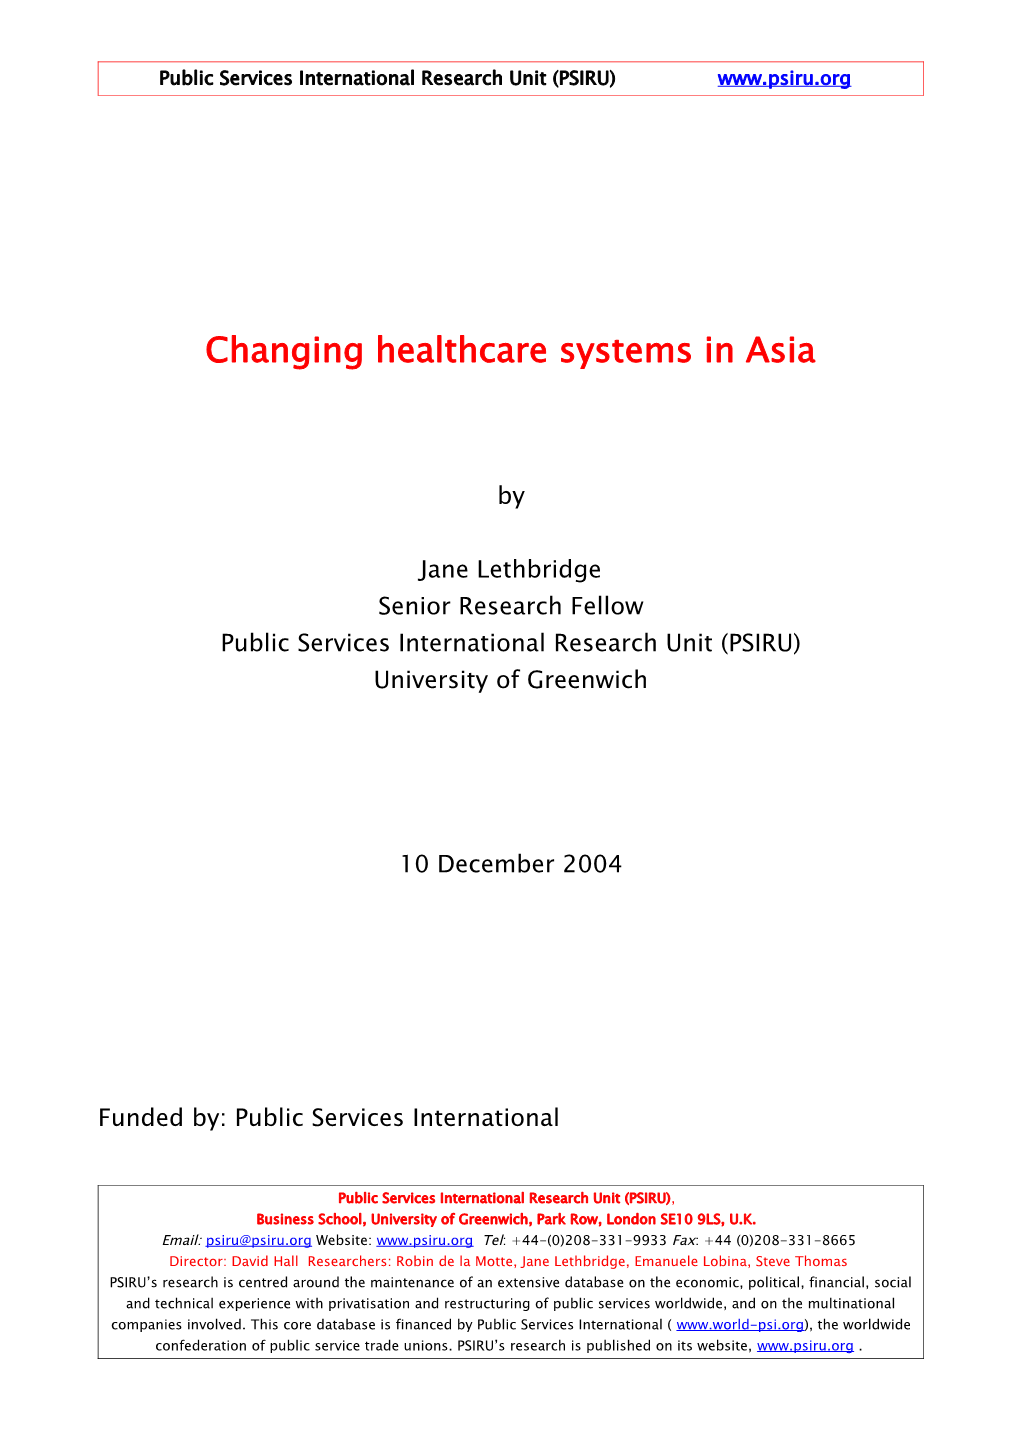 Changing Healthcare Systems in Asia